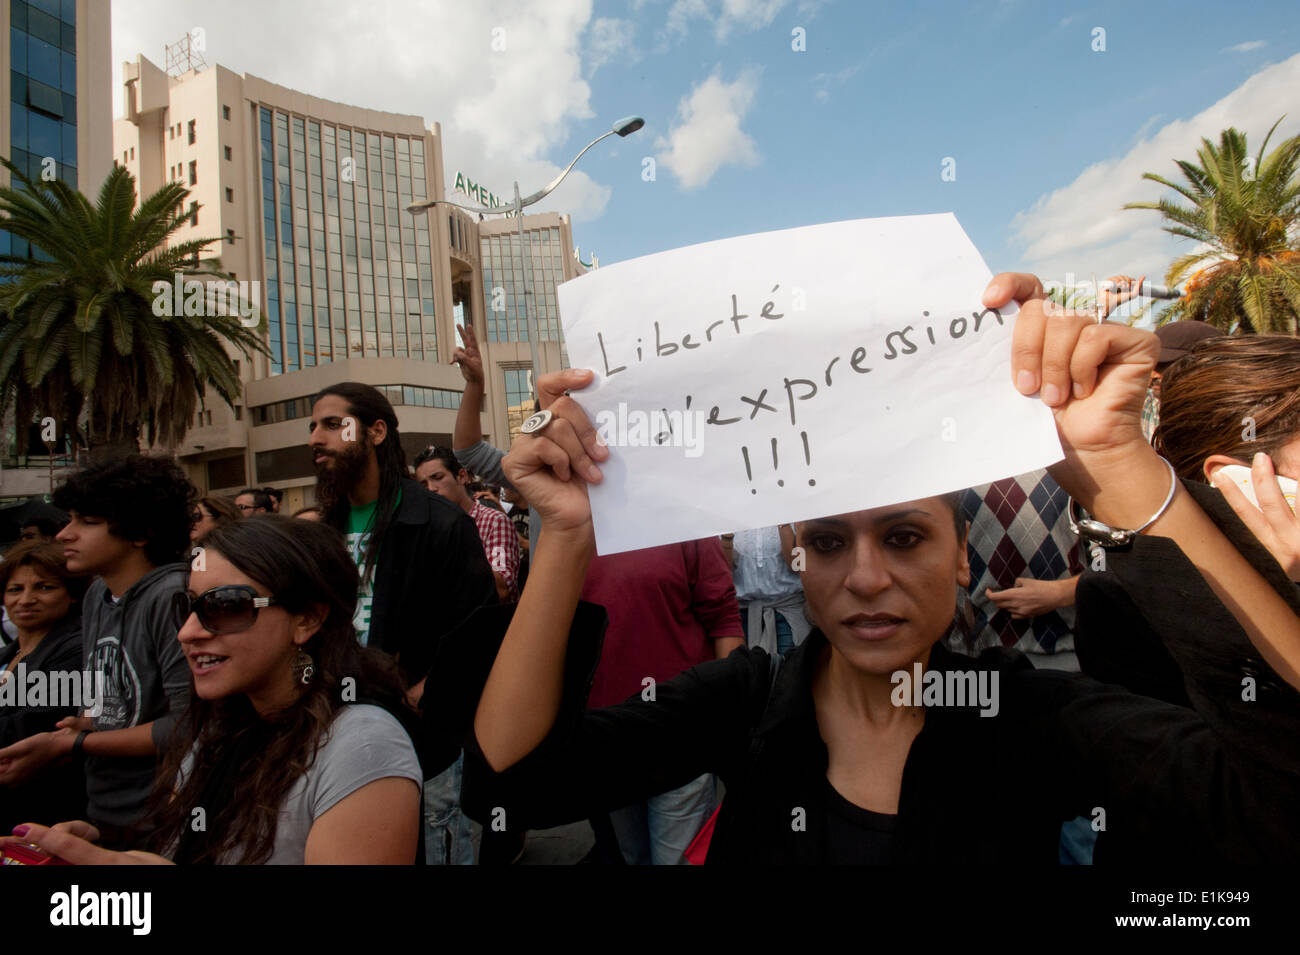 Demonstration for the freedom of speech, against islamist in Tunis. Stock Photo